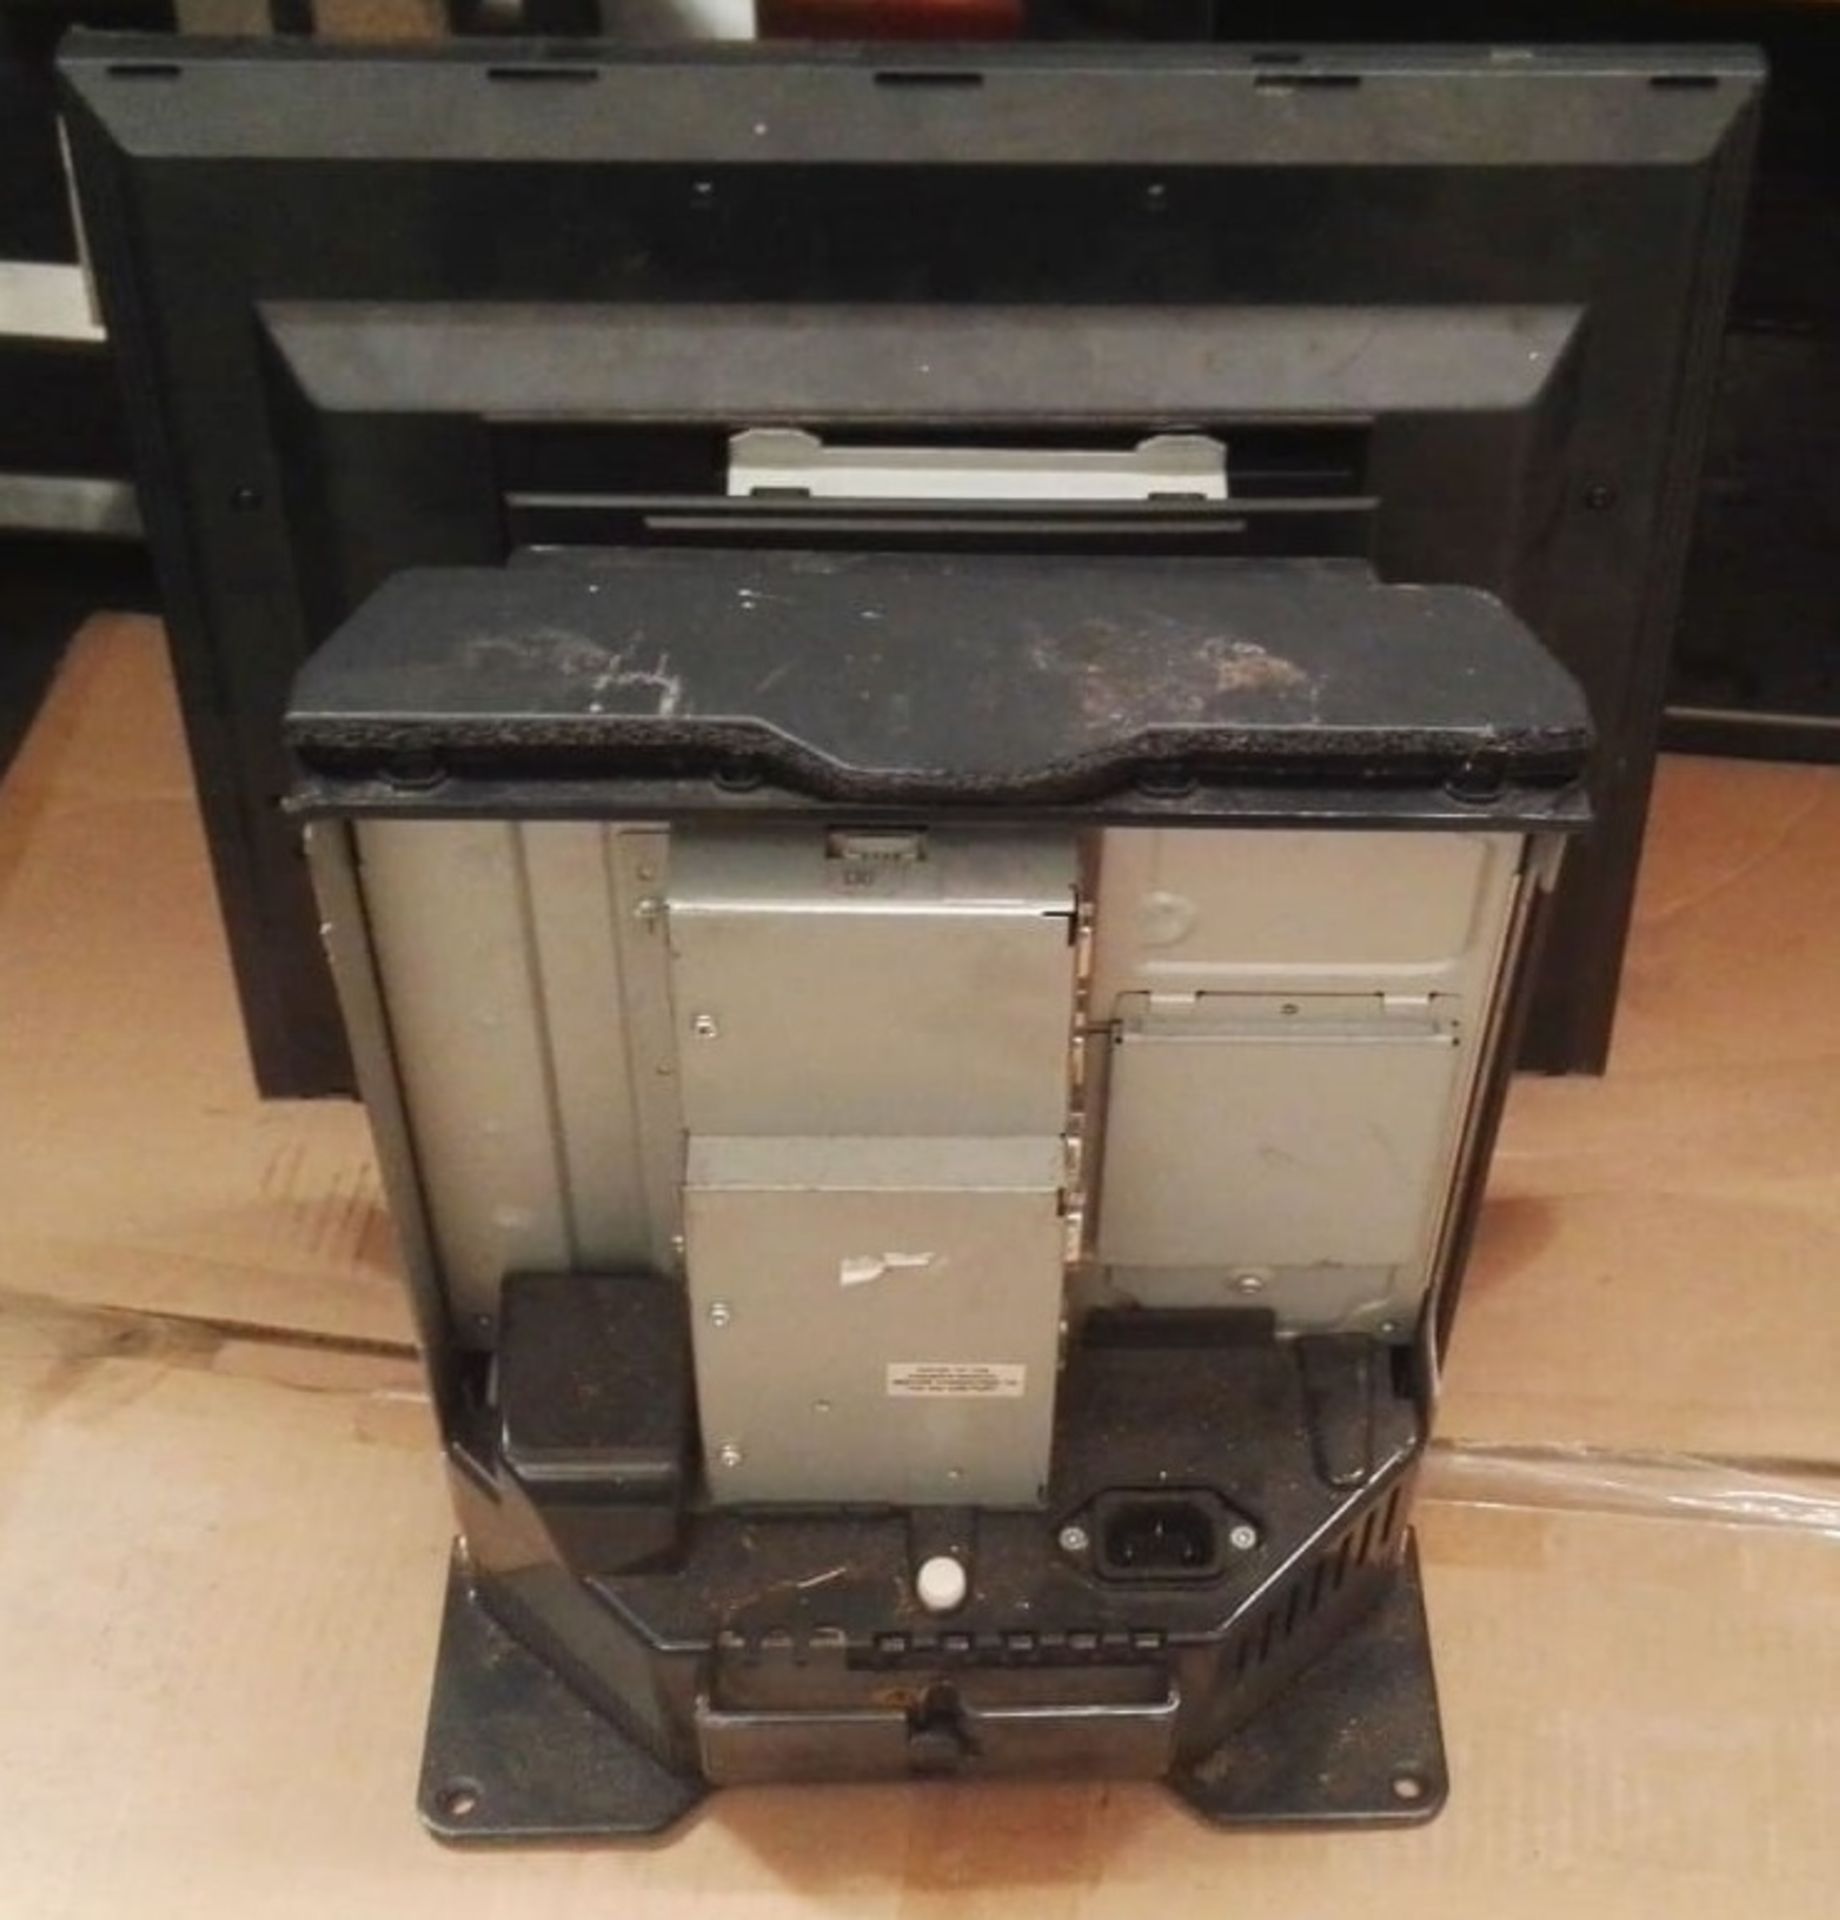 1 x Toshiba Till System - Used, Recently Removed From A Working Site - CL505 - Ref: TL044 - - Image 3 of 5